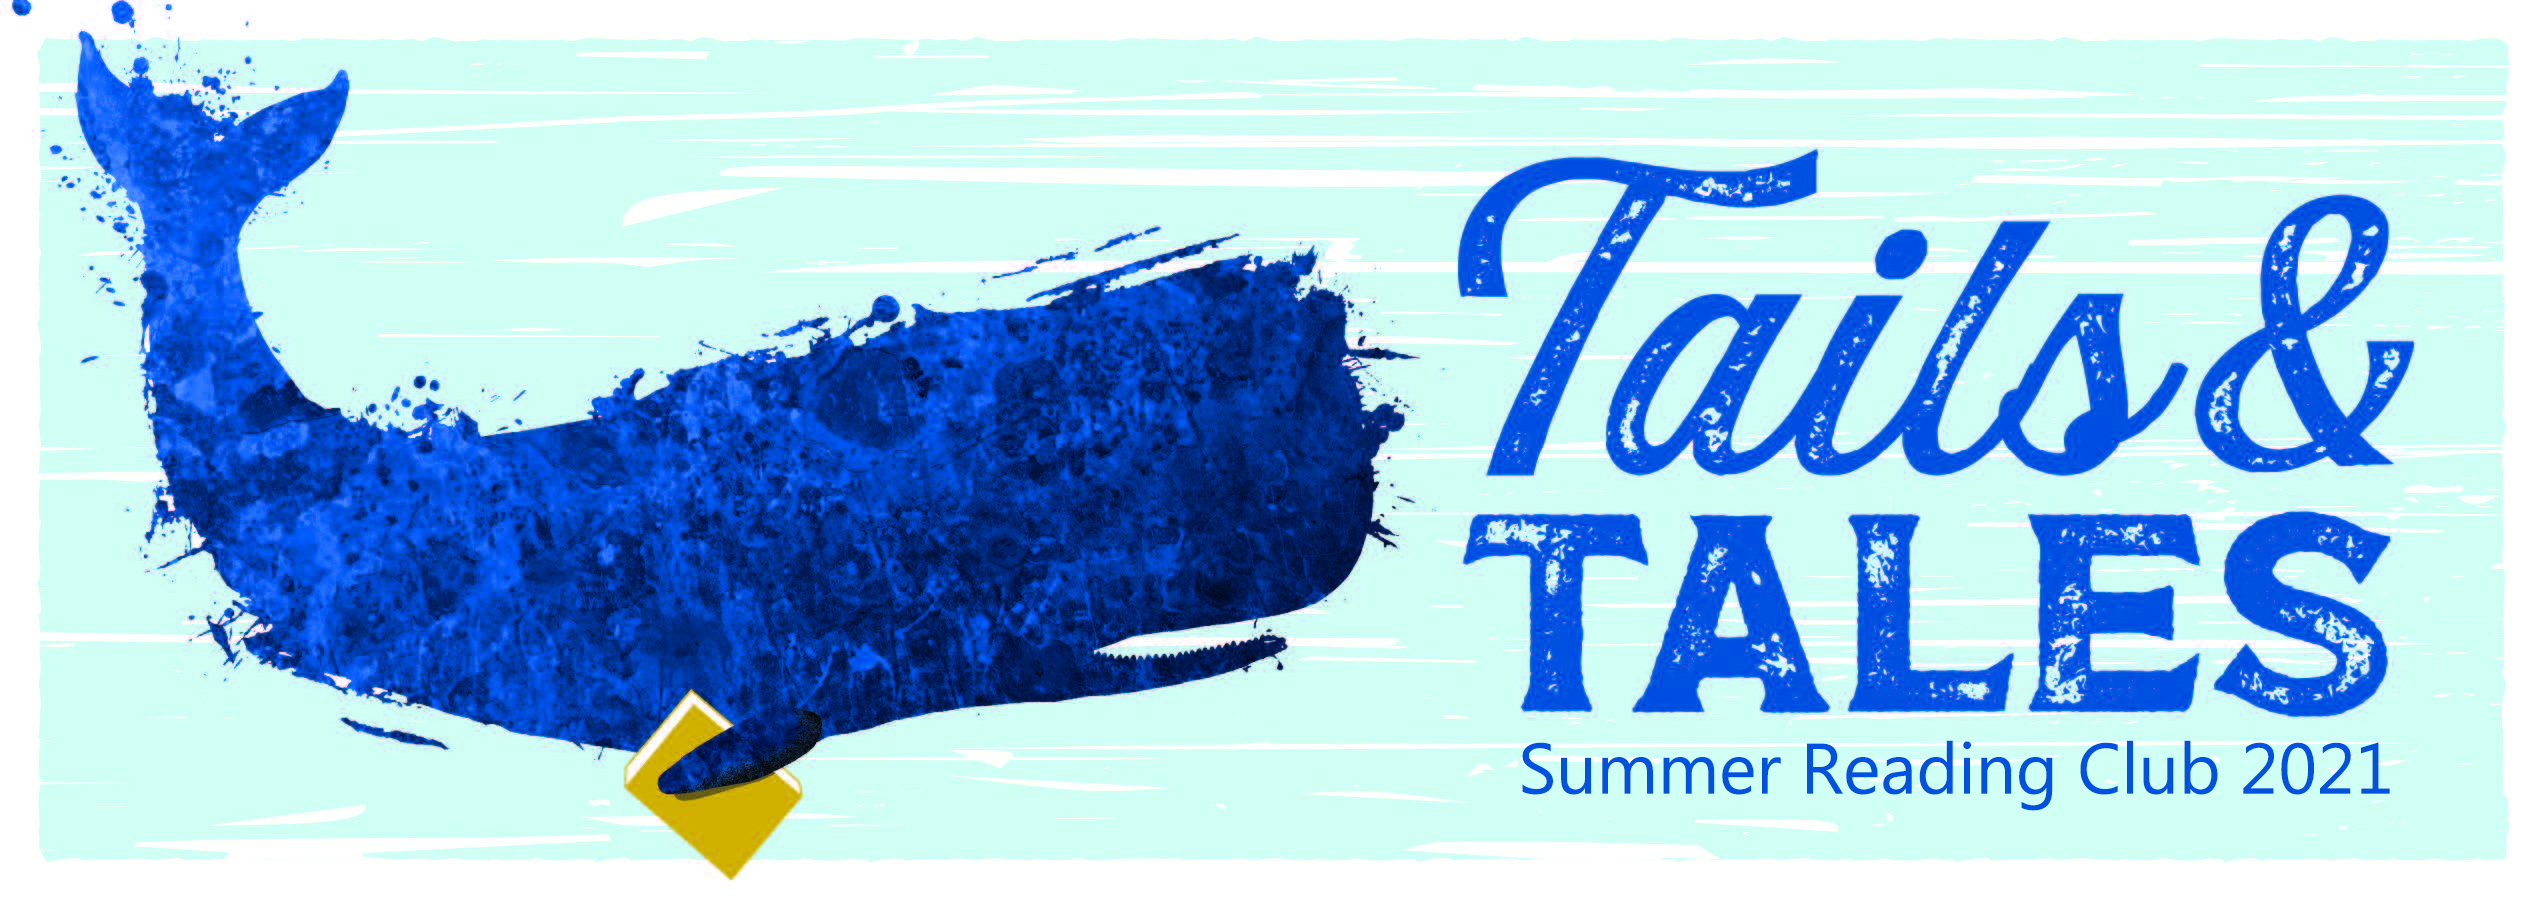 Tails & Tales summer reading club 2021 with blue whale holding book. 